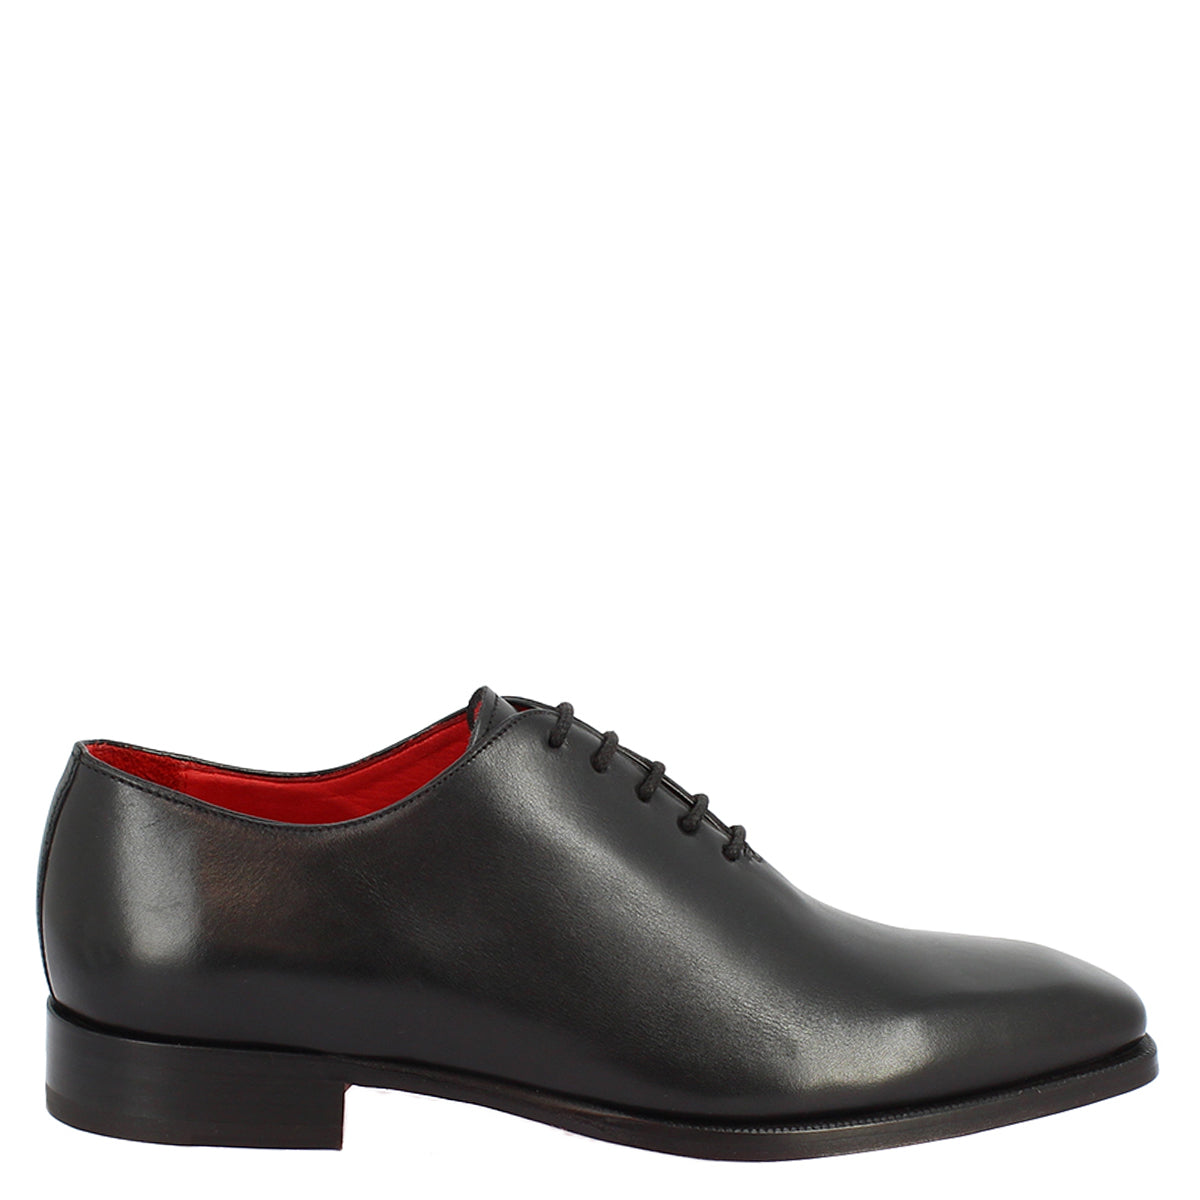 Handmade men's lace-up shoes in black leather with laces